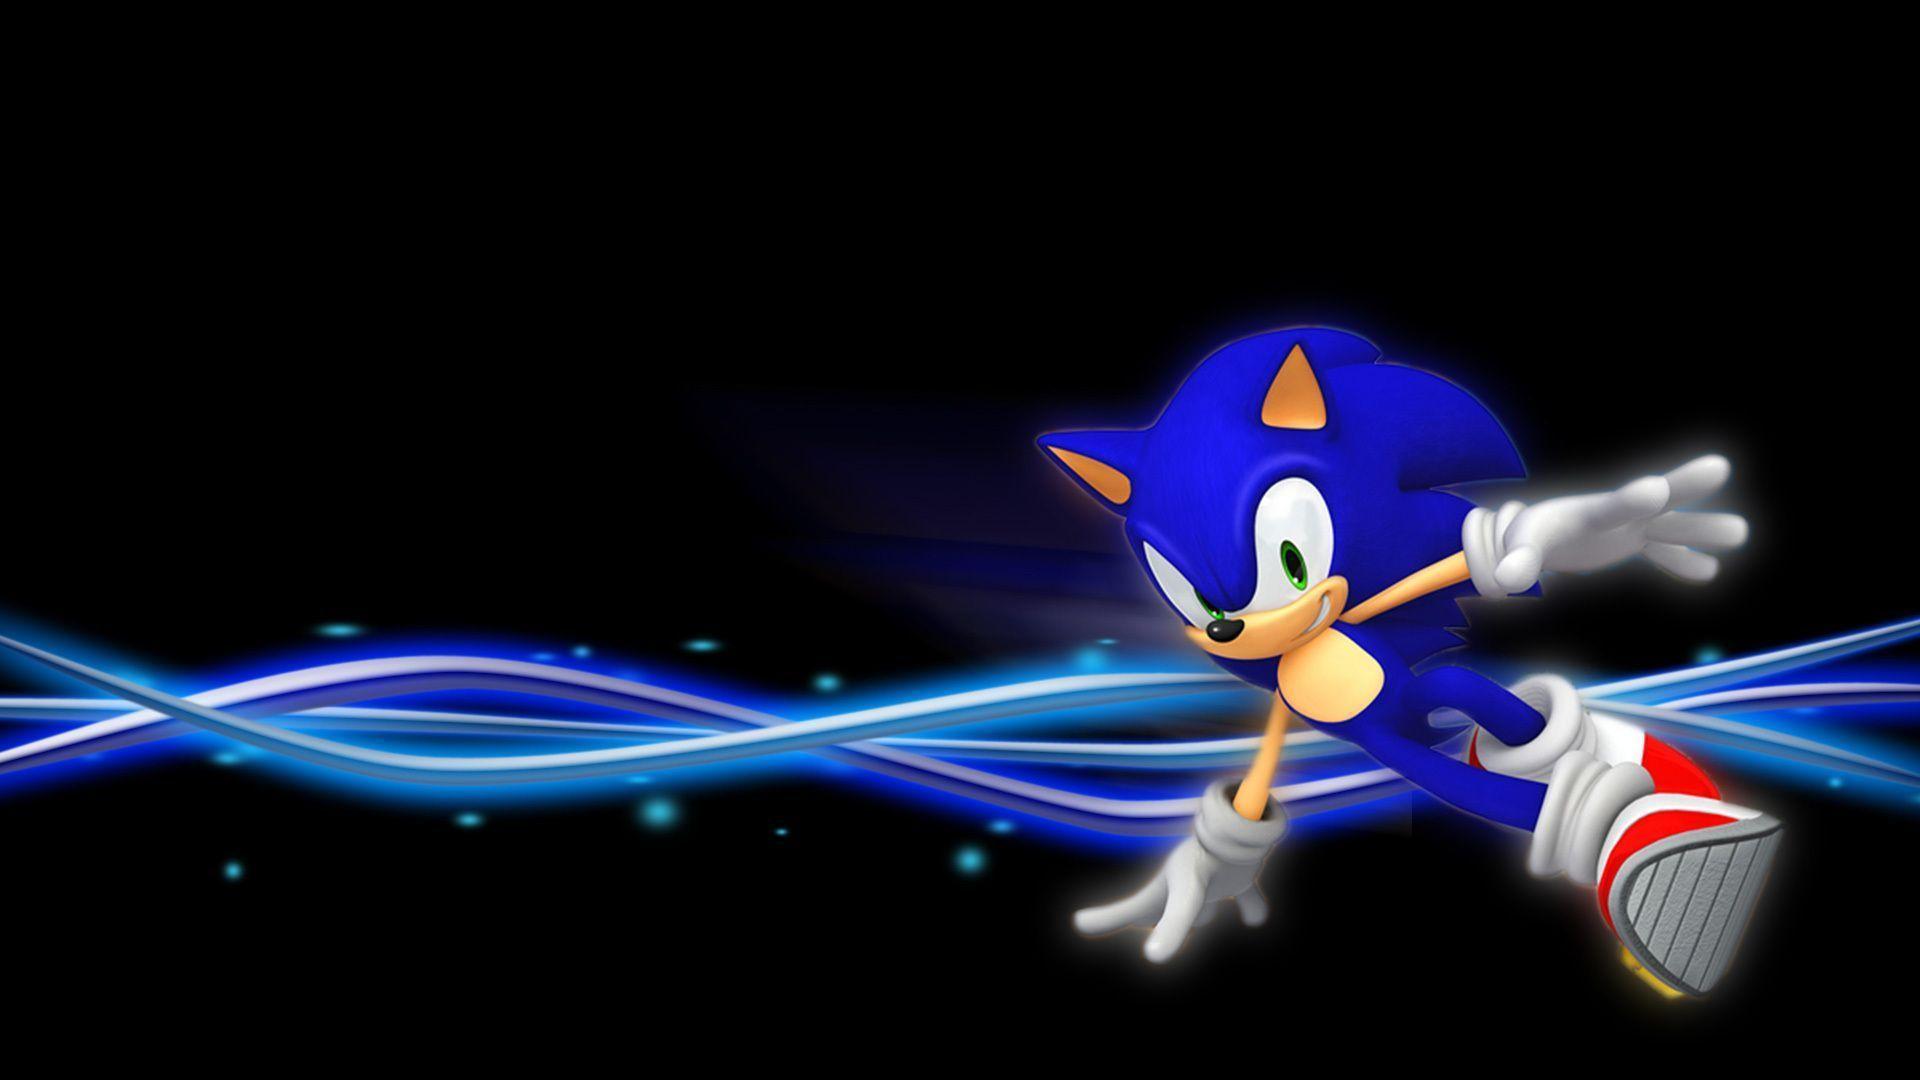 Wallpaper For > Classic Sonic The Hedgehog Wallpaper